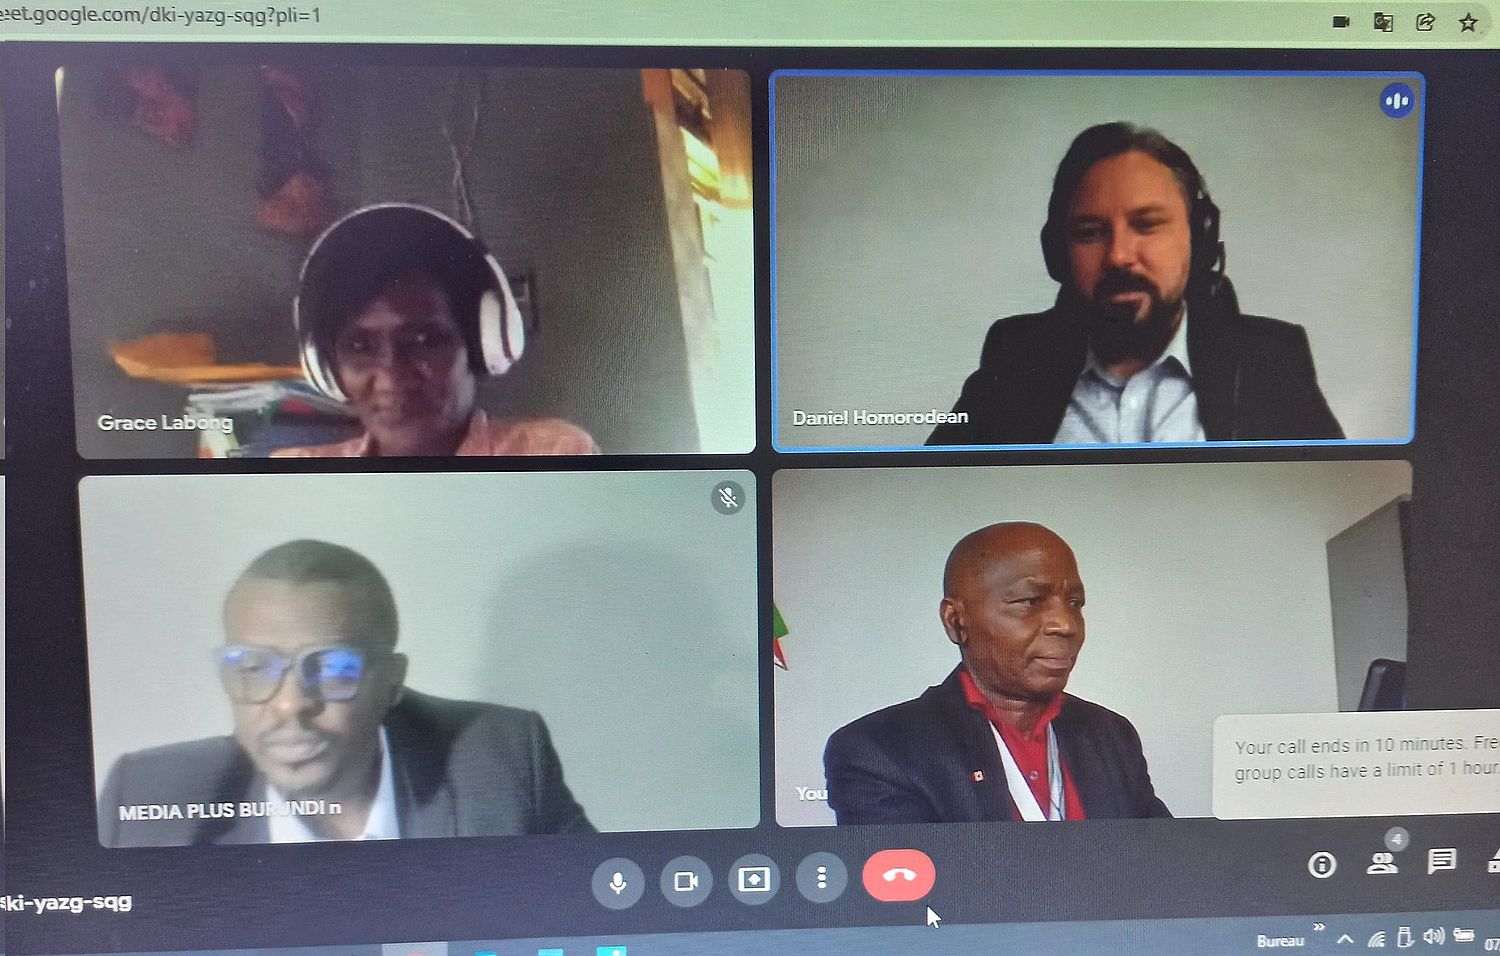 Screenshot of four people in an online meeting.